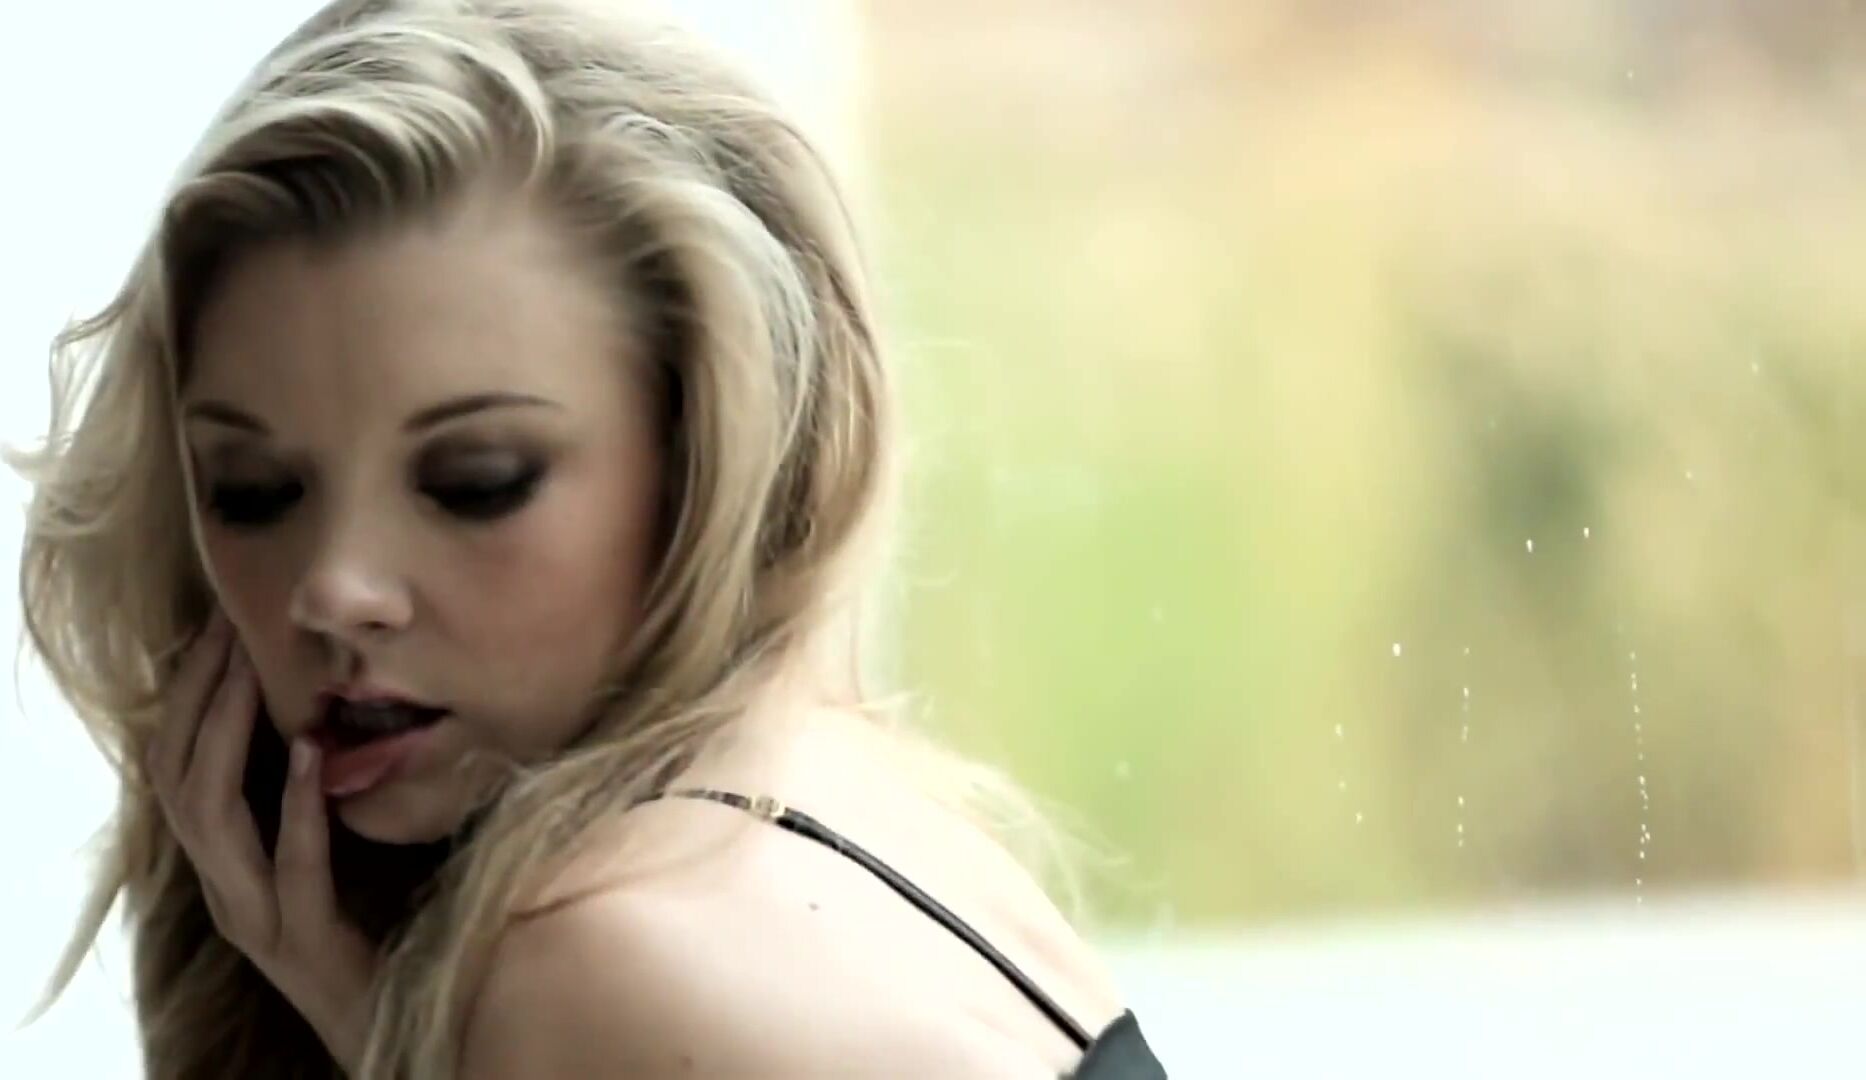 Ffm Natalie Dormer in explicit excerpts from TV series and real life obscene videos Telugu - 2